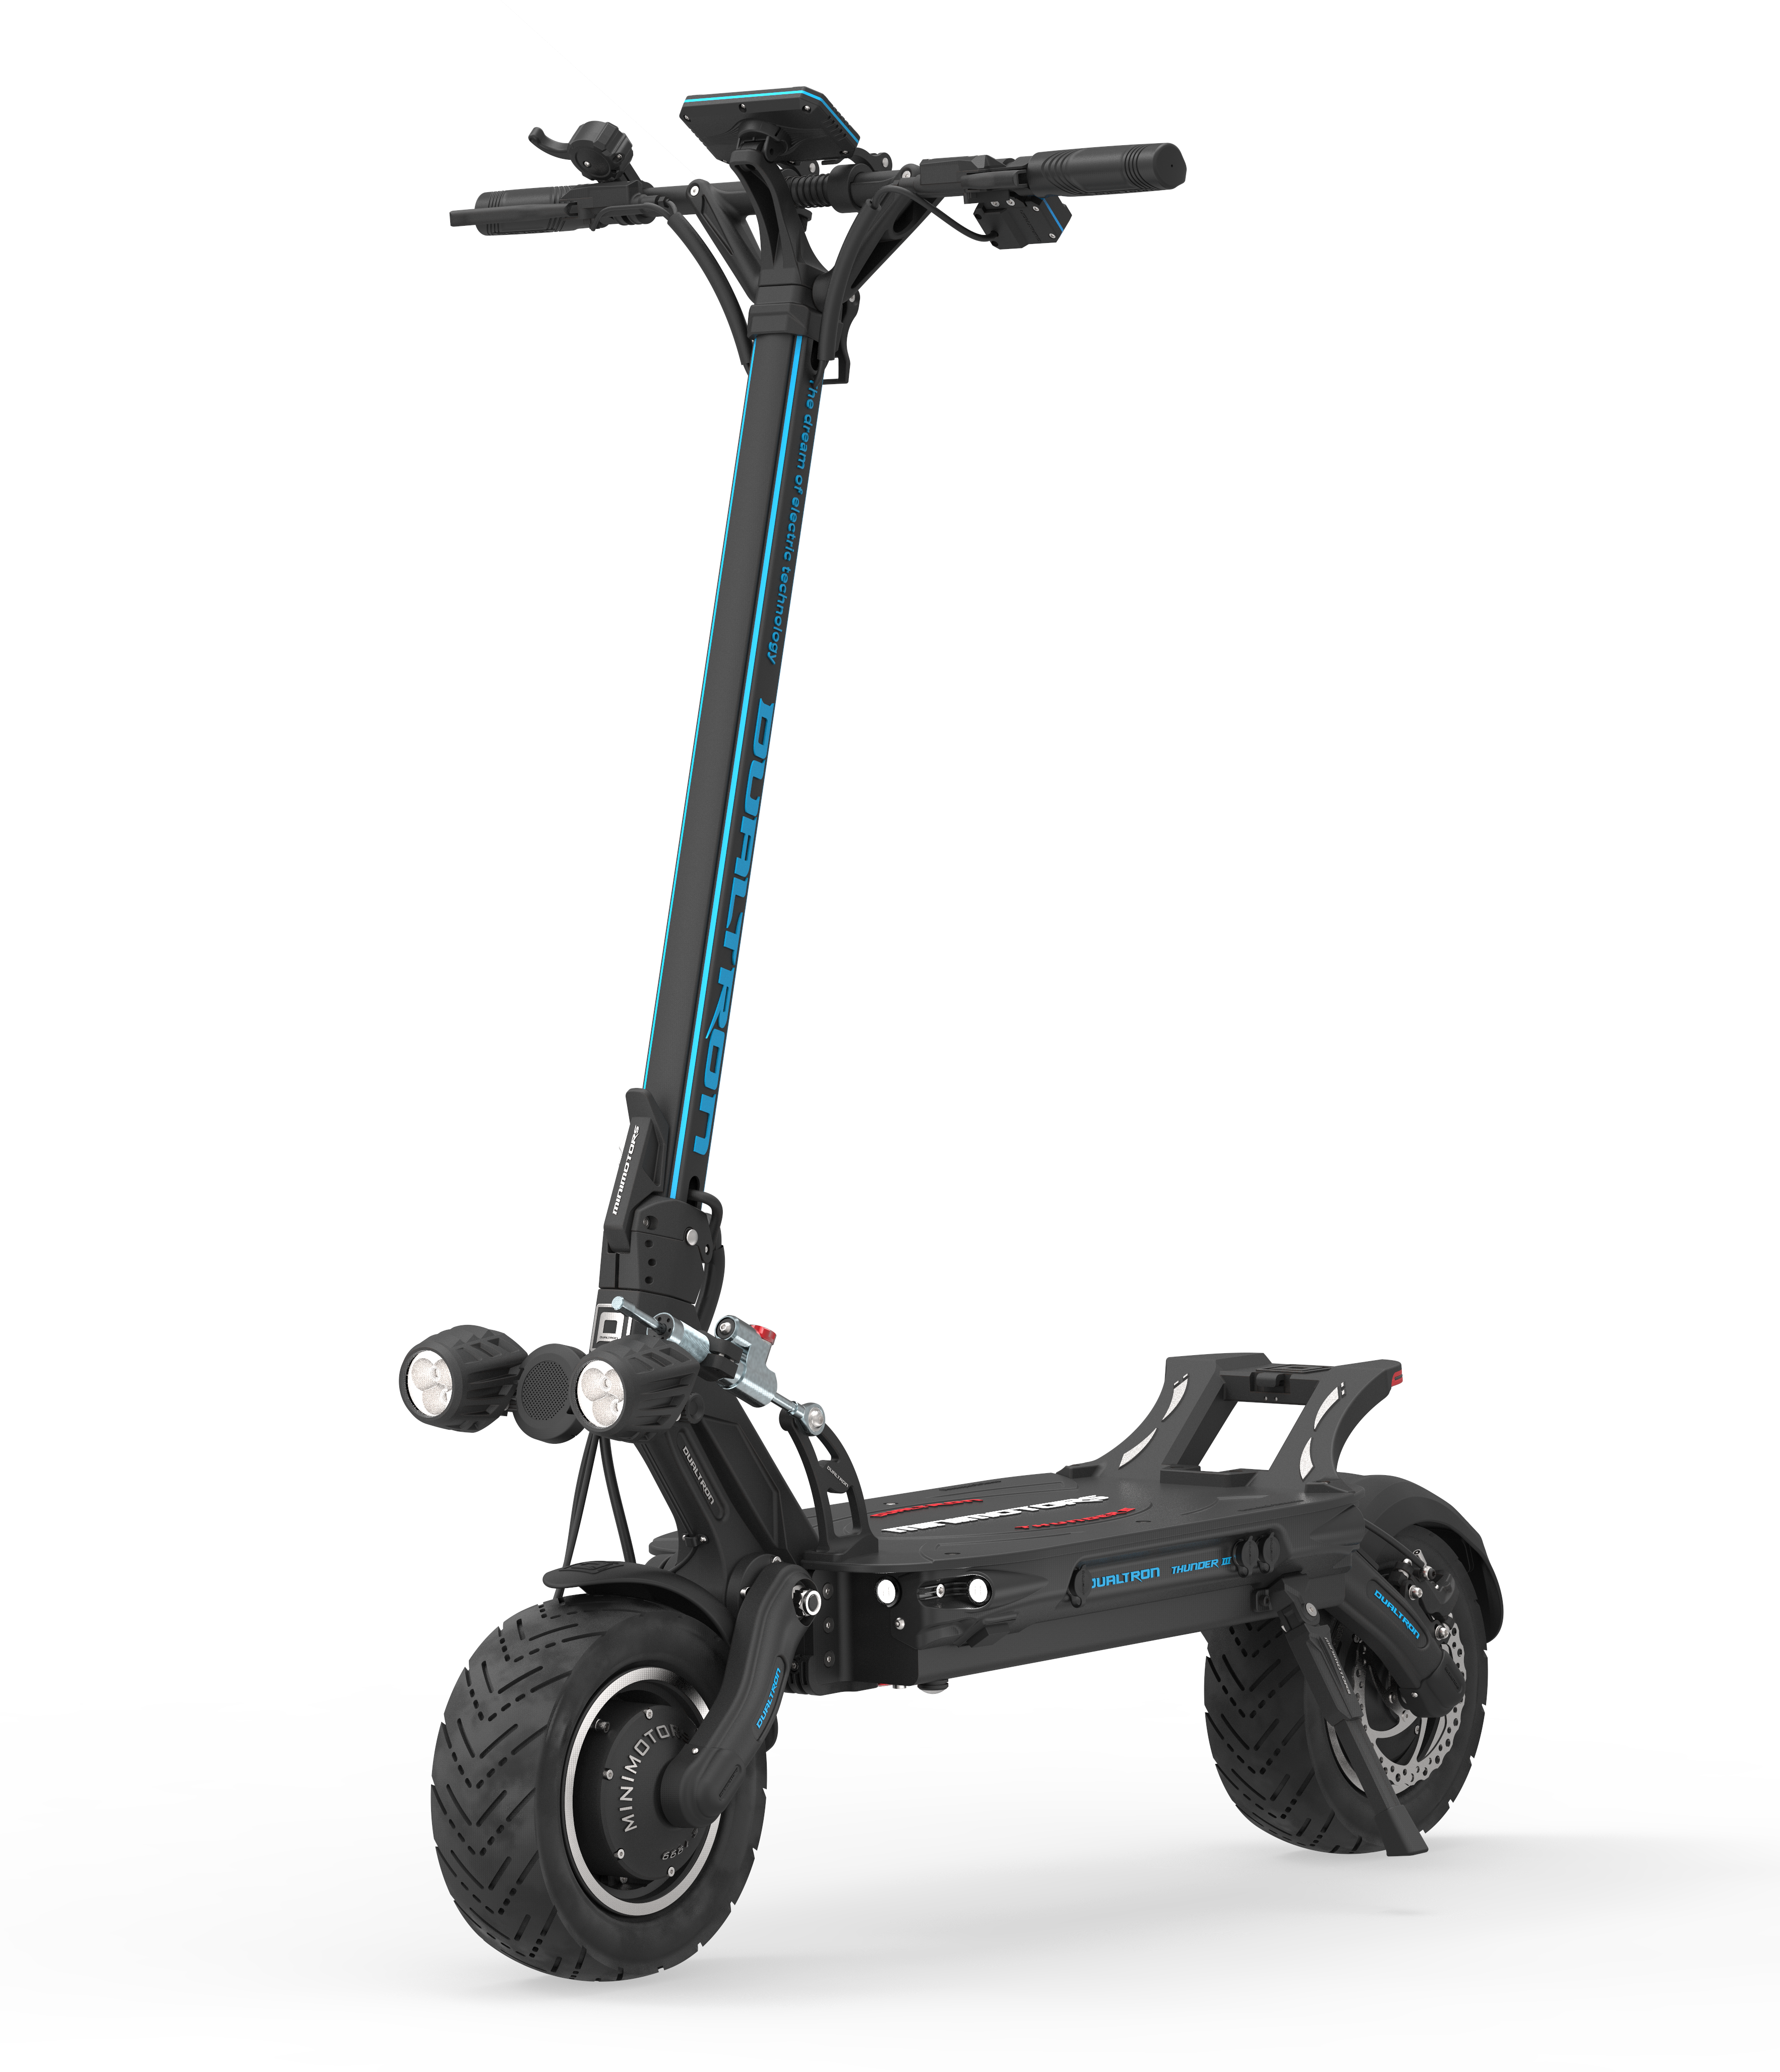 Dualtron Thunder 3 electric scooter in stock - Enjoy the ride